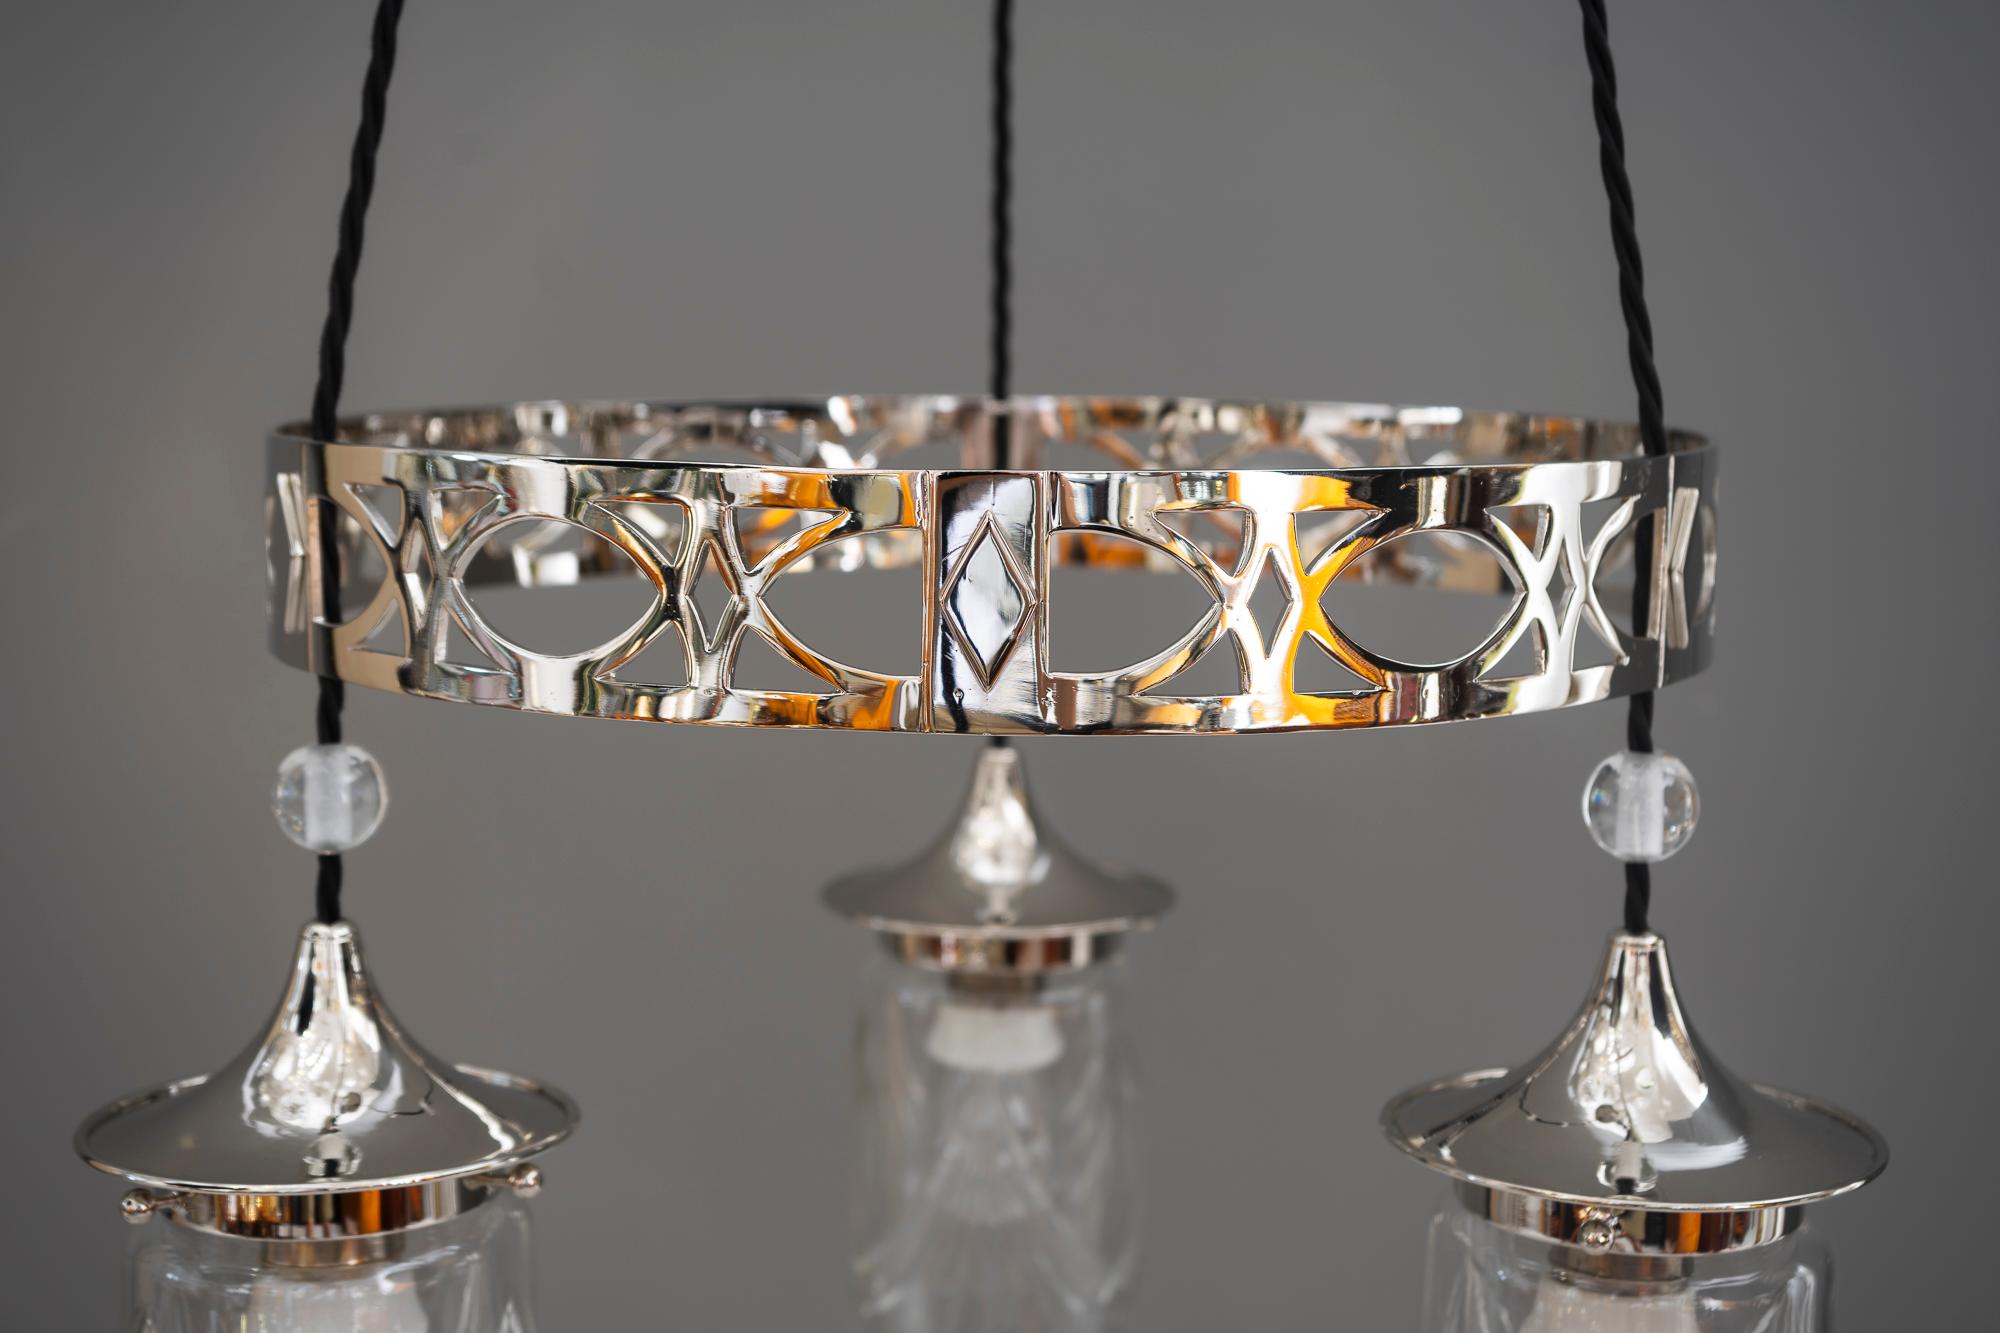 Nickel-Plated Art Deco Chandelier with Original Cut-Glasses, circa 1920s For Sale 3